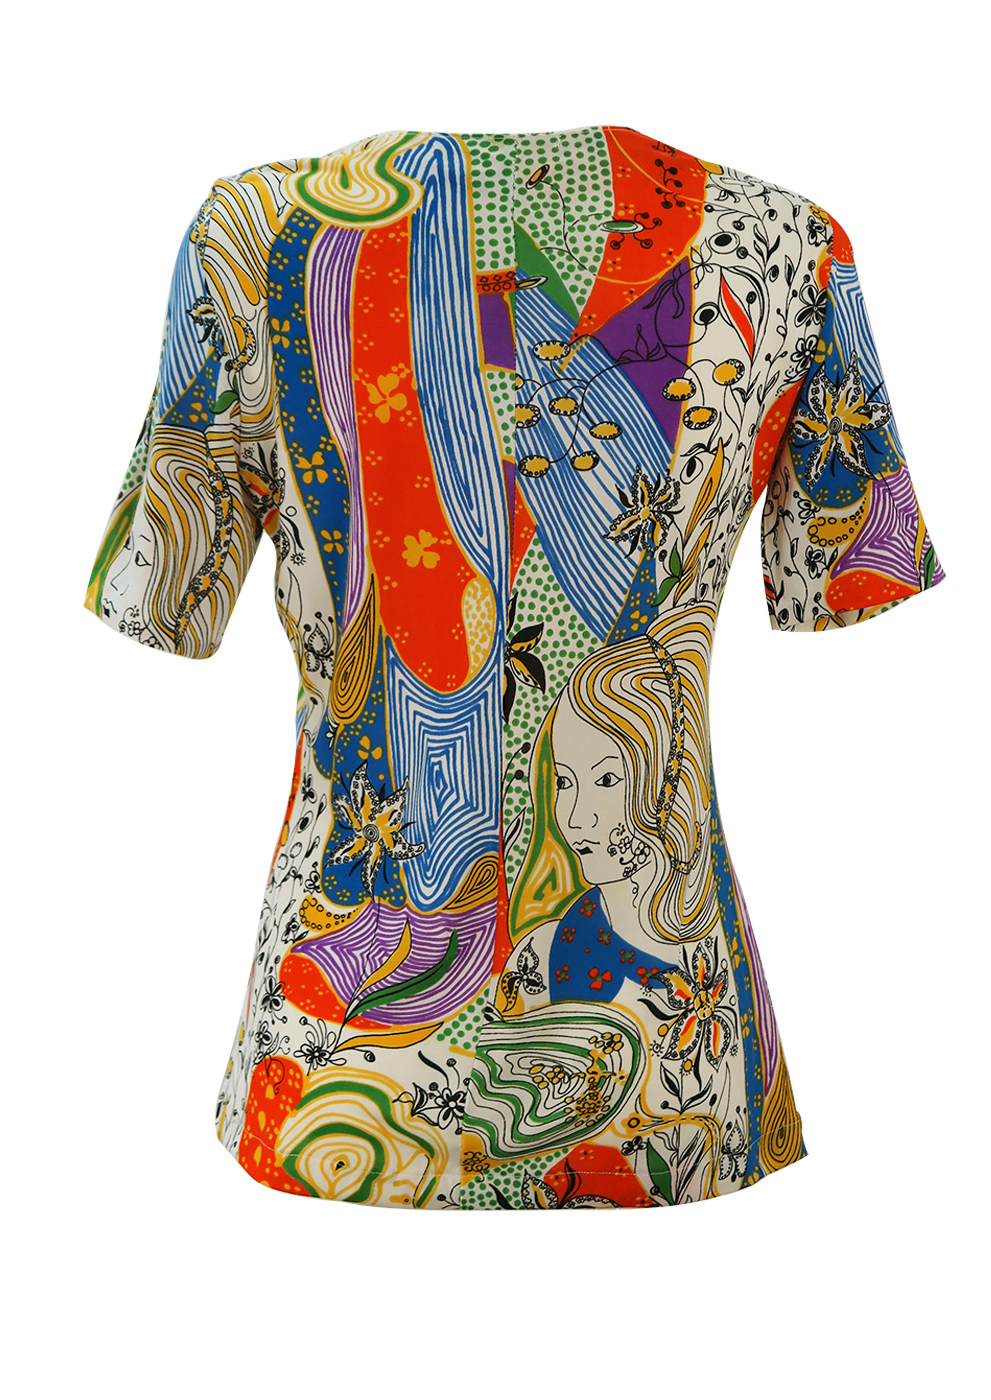 Vintage 70's Short Sleeved Psychedelic Top with Woman's Face - M ...